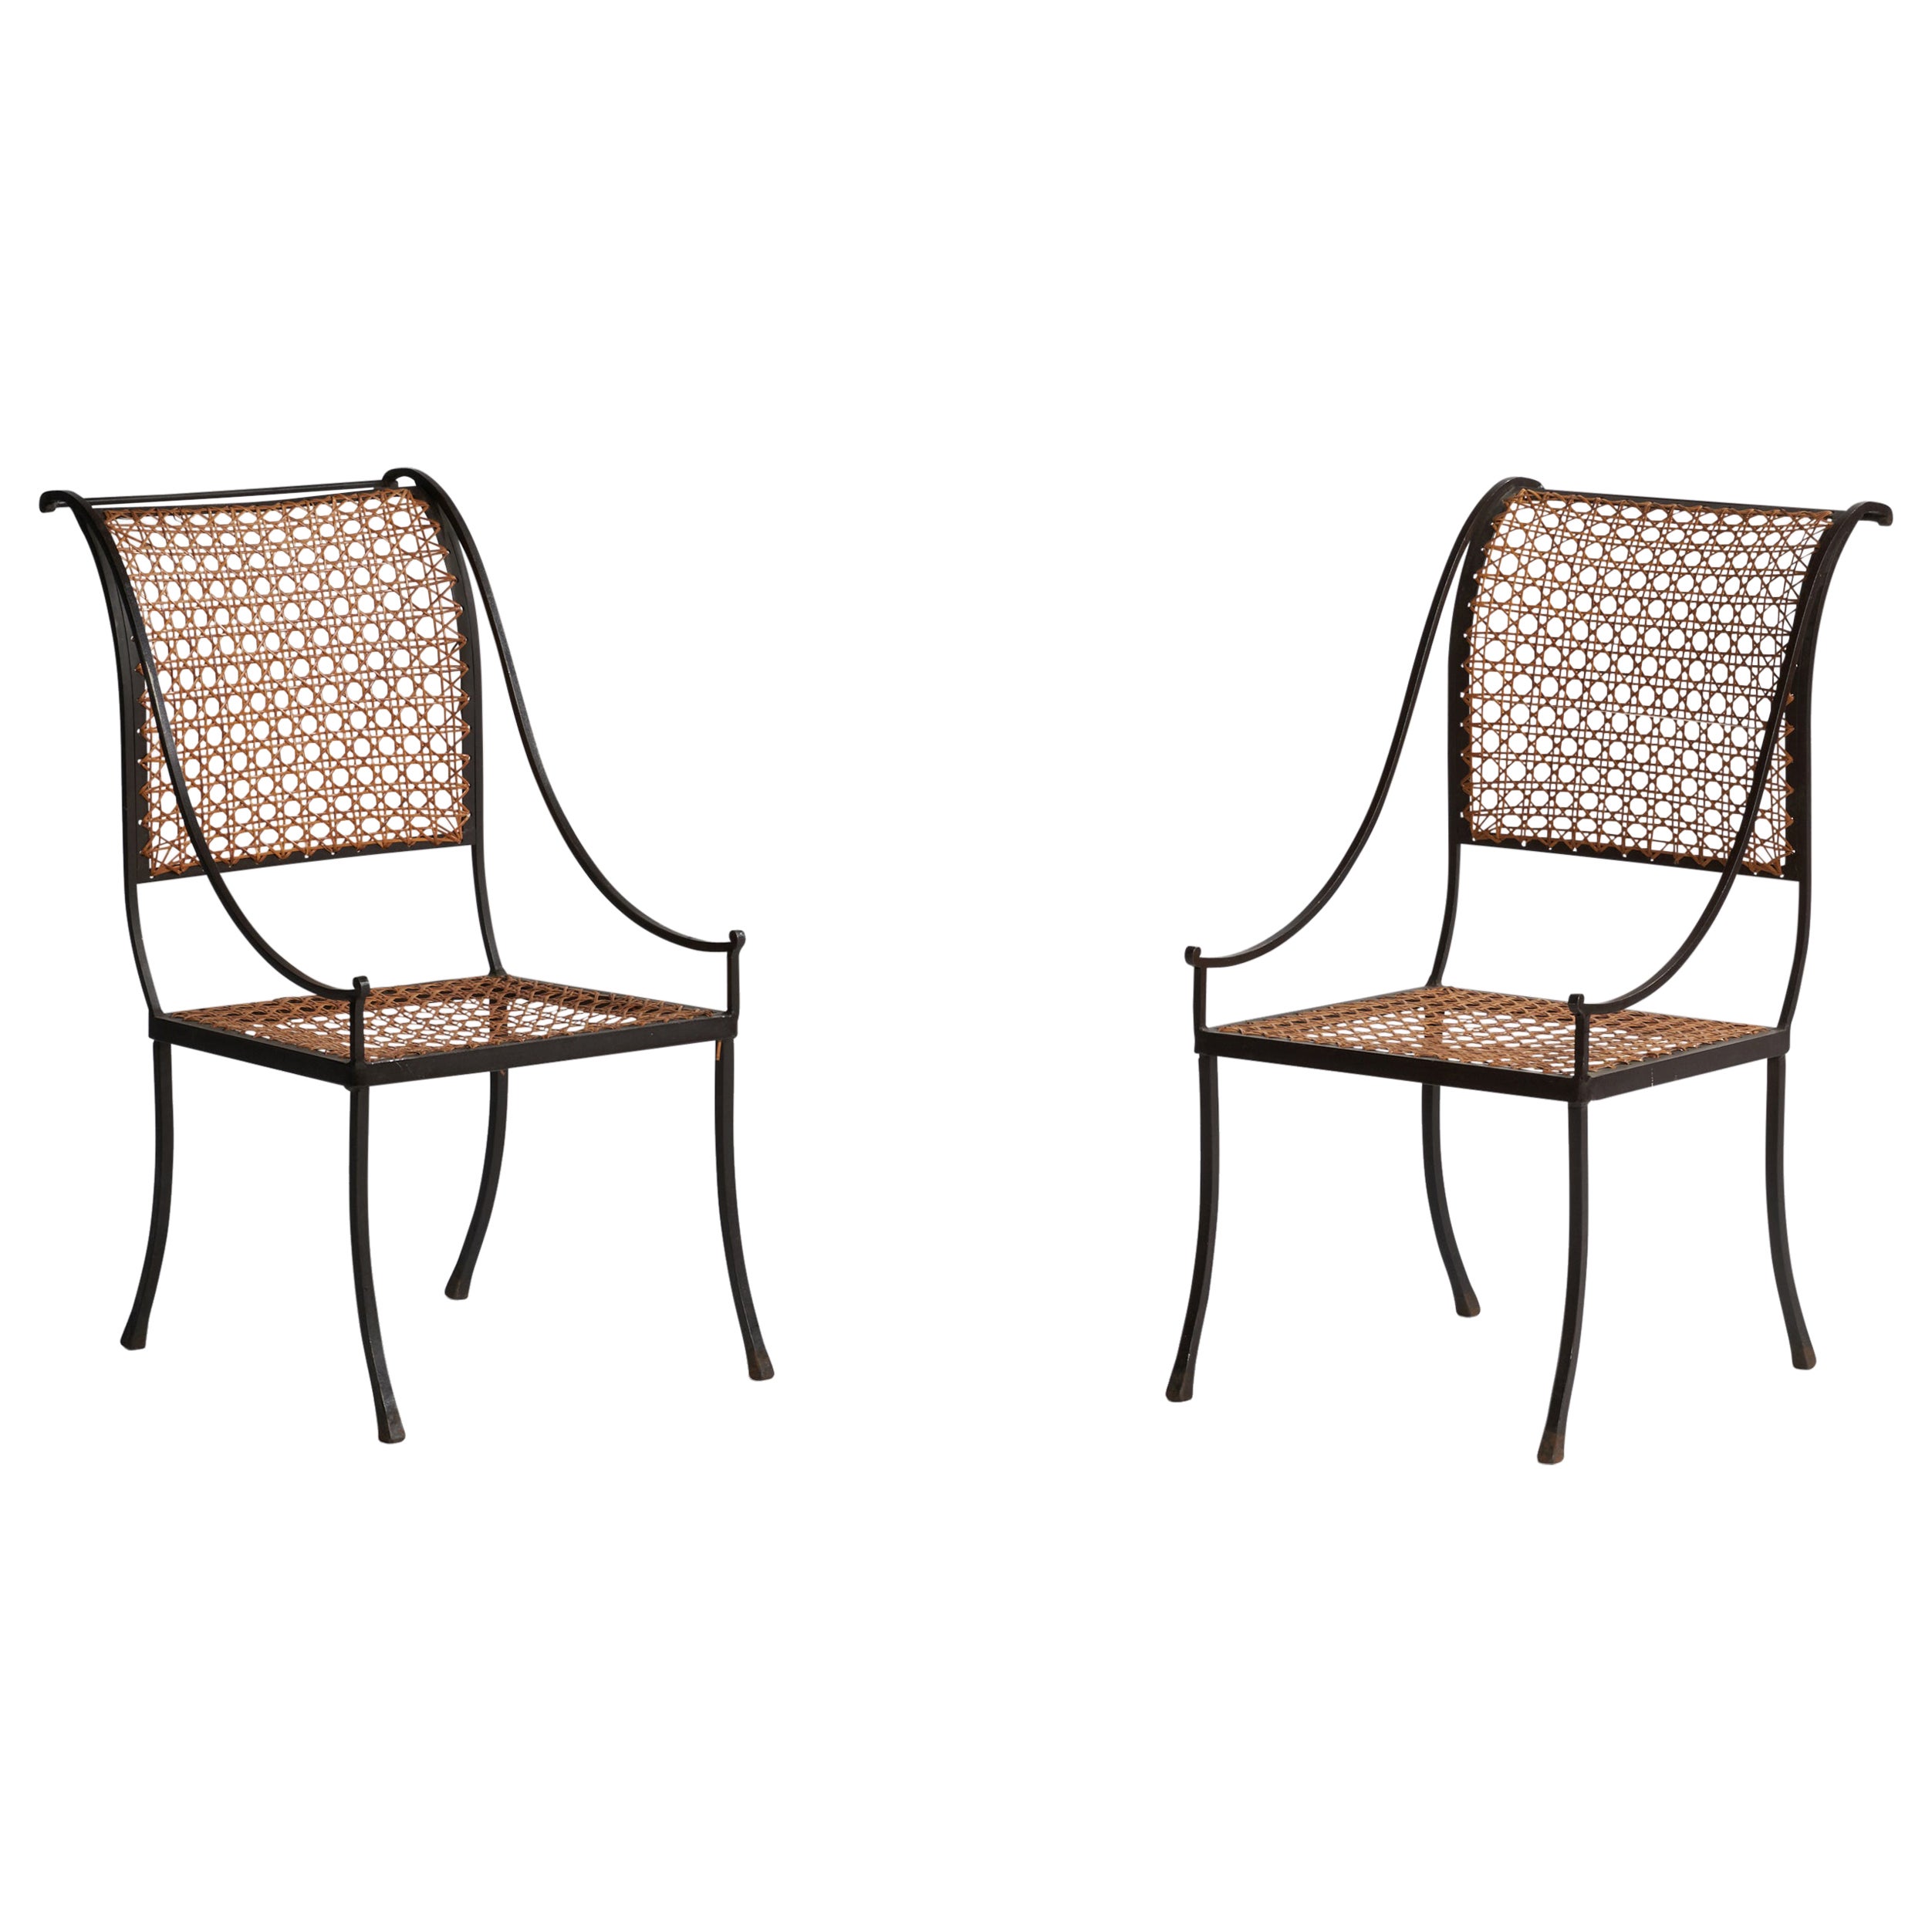 John Vesey, Arm Chairs, Wrought Iron, Cane, USA, 1950s For Sale